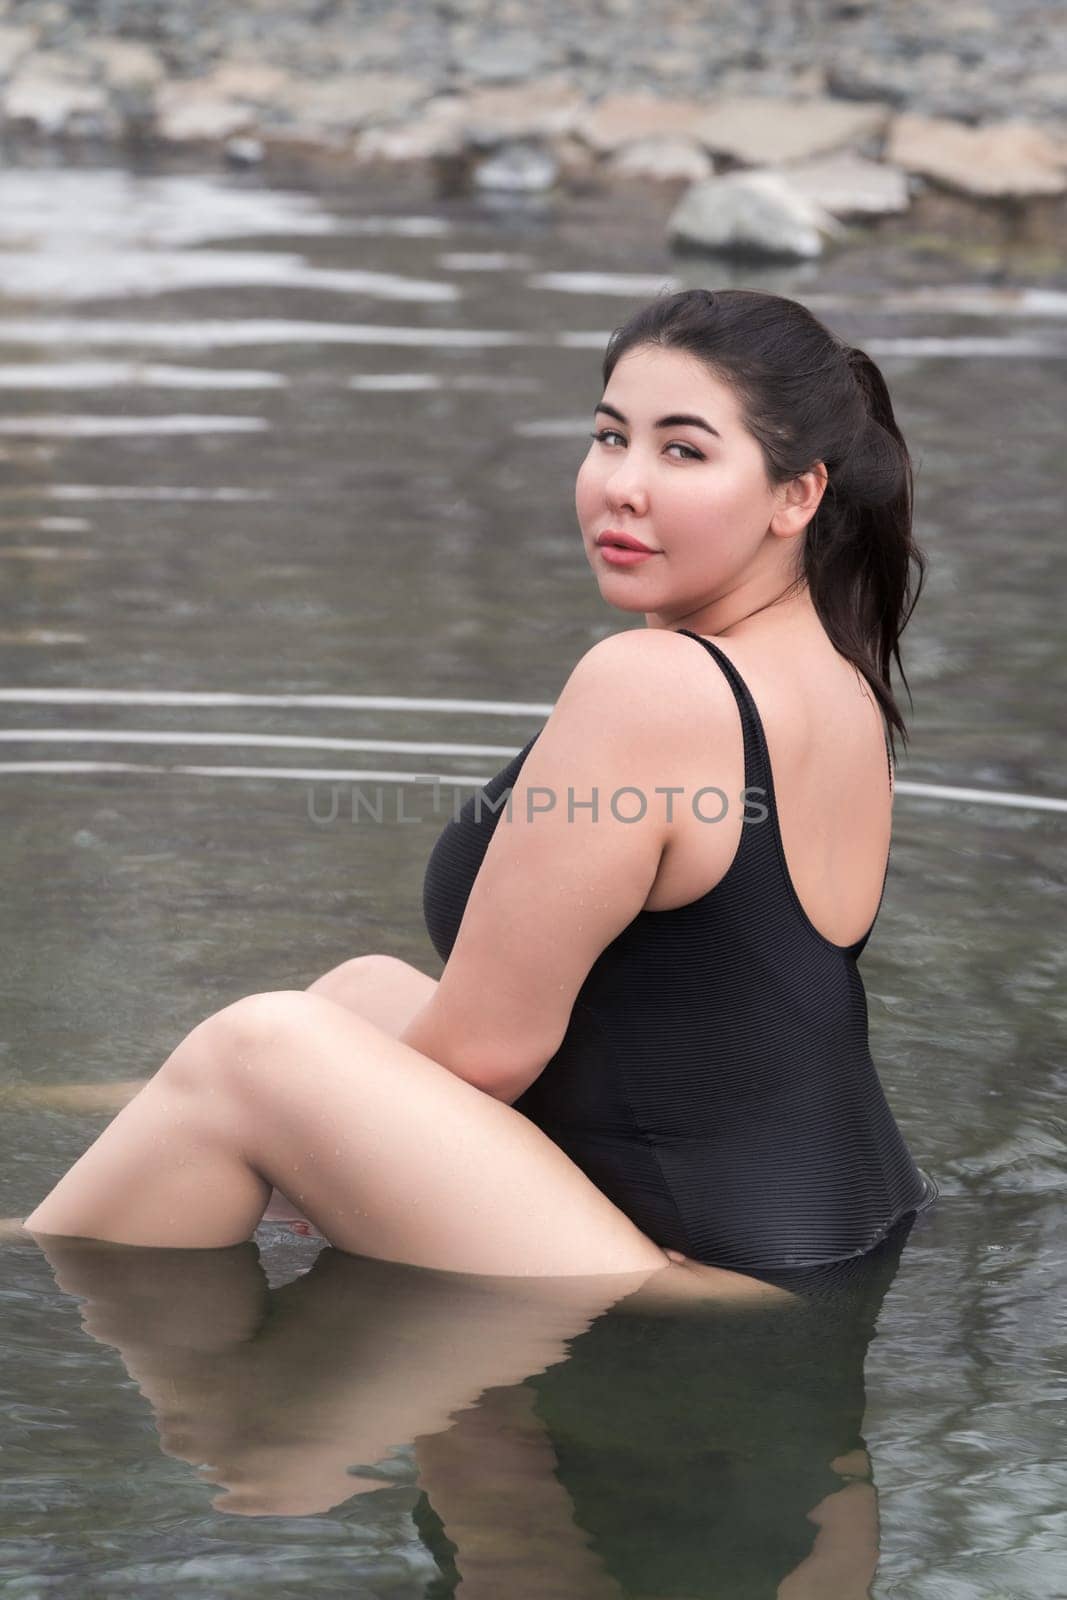 Overweight young woman in black one-piece bathing swimsuit sitting in mineral water in outdoors pool at balneotherapy spa, hot springs resort. Side view of full figured xxl woman looking over shoulder